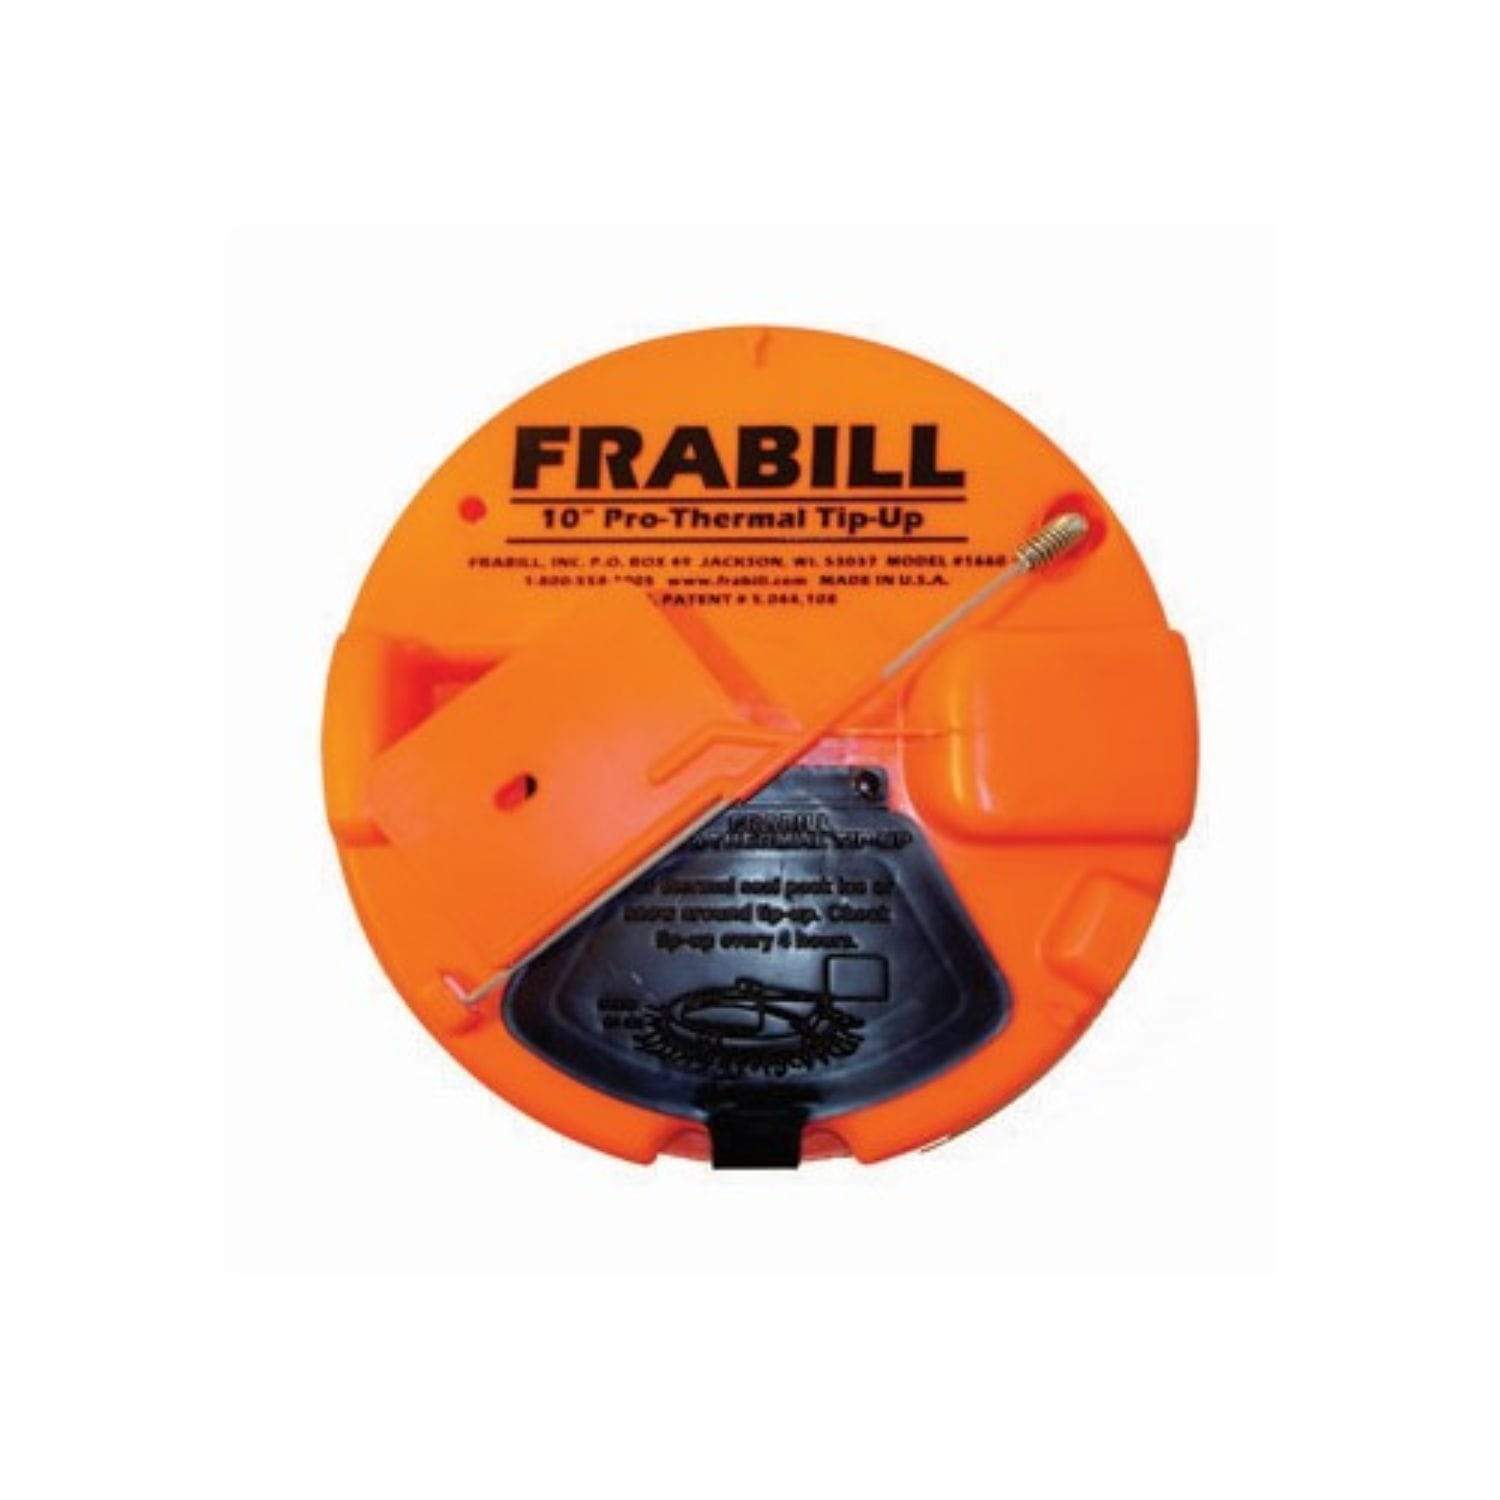 Frabill Fishing : Ice Fishing Frabill Pro Thermal Tip-Up Org 1660